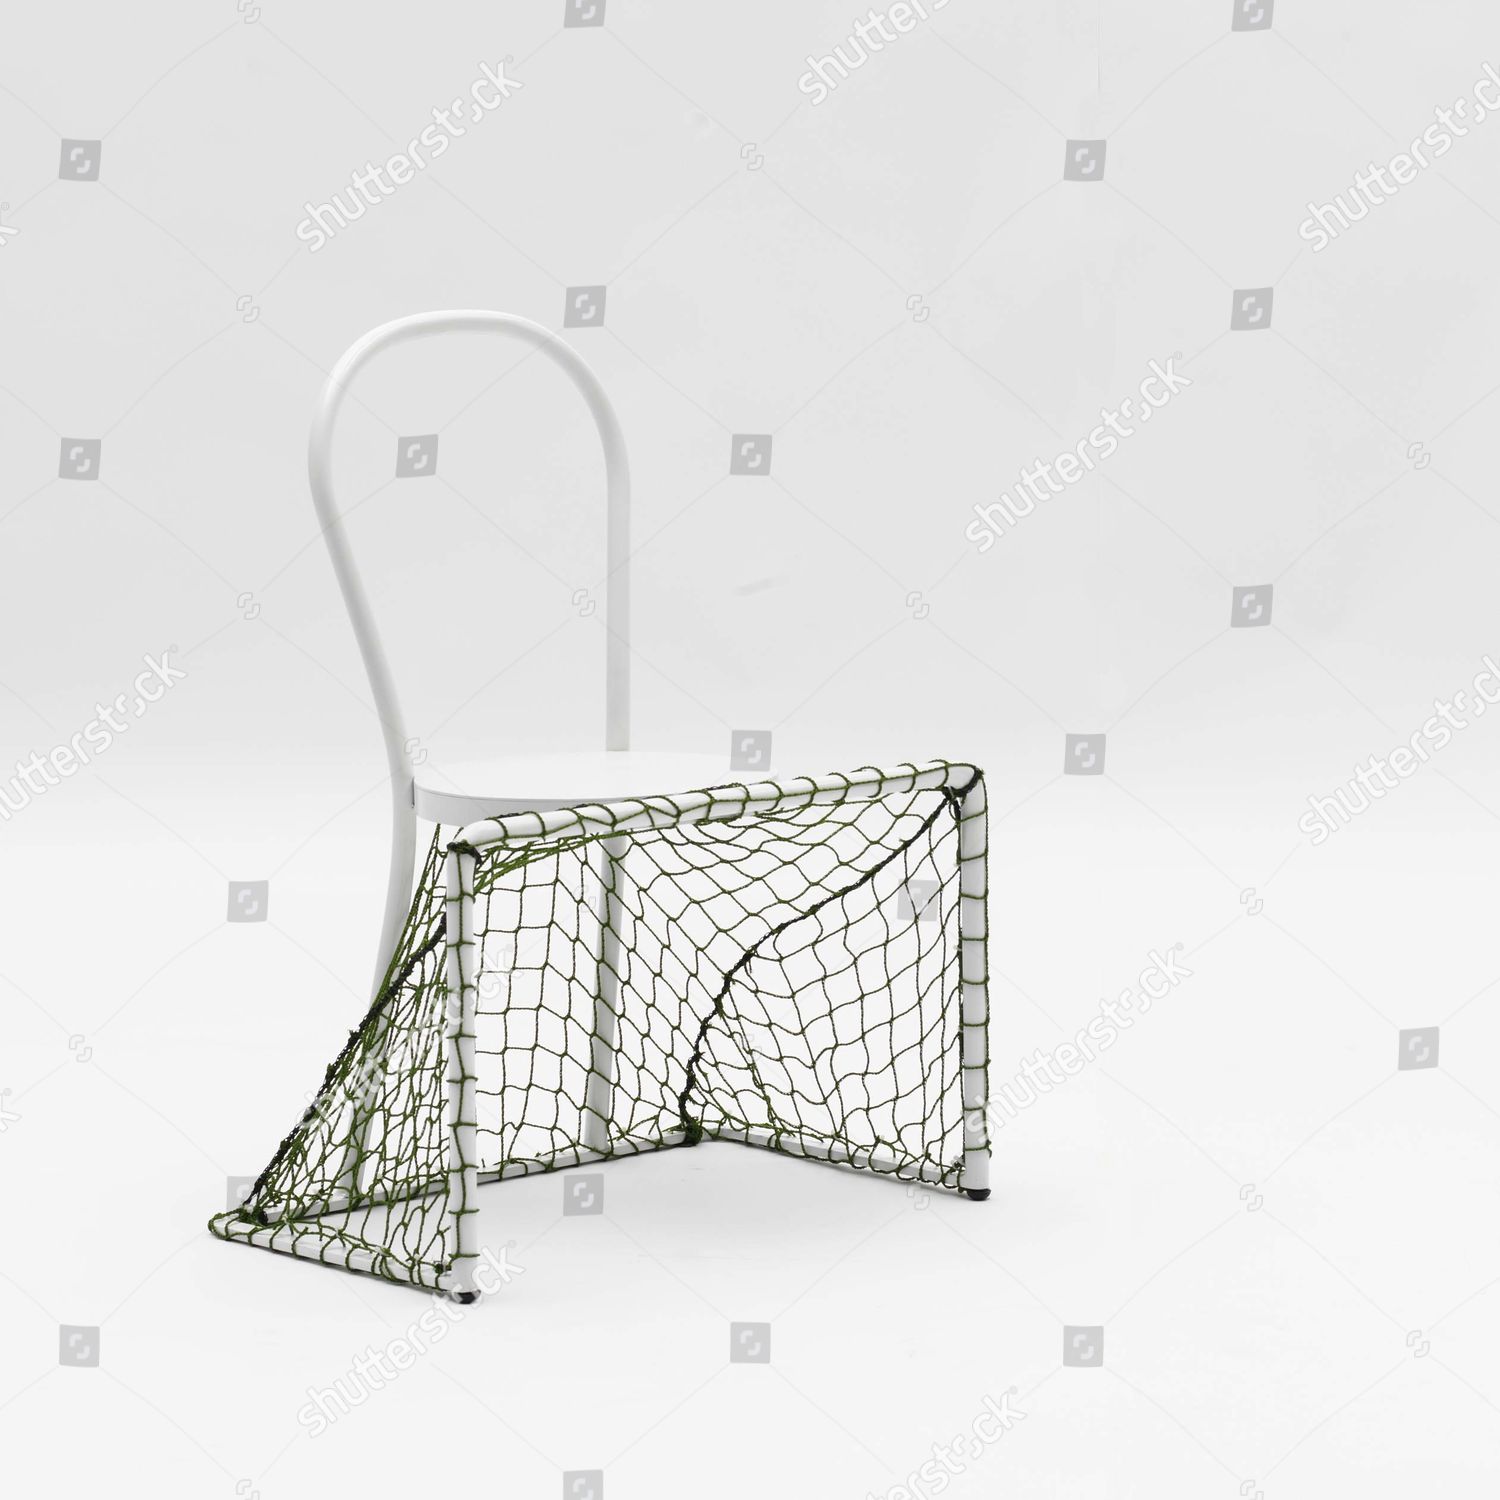 lazy football goal chairs editorial stock photo  stock